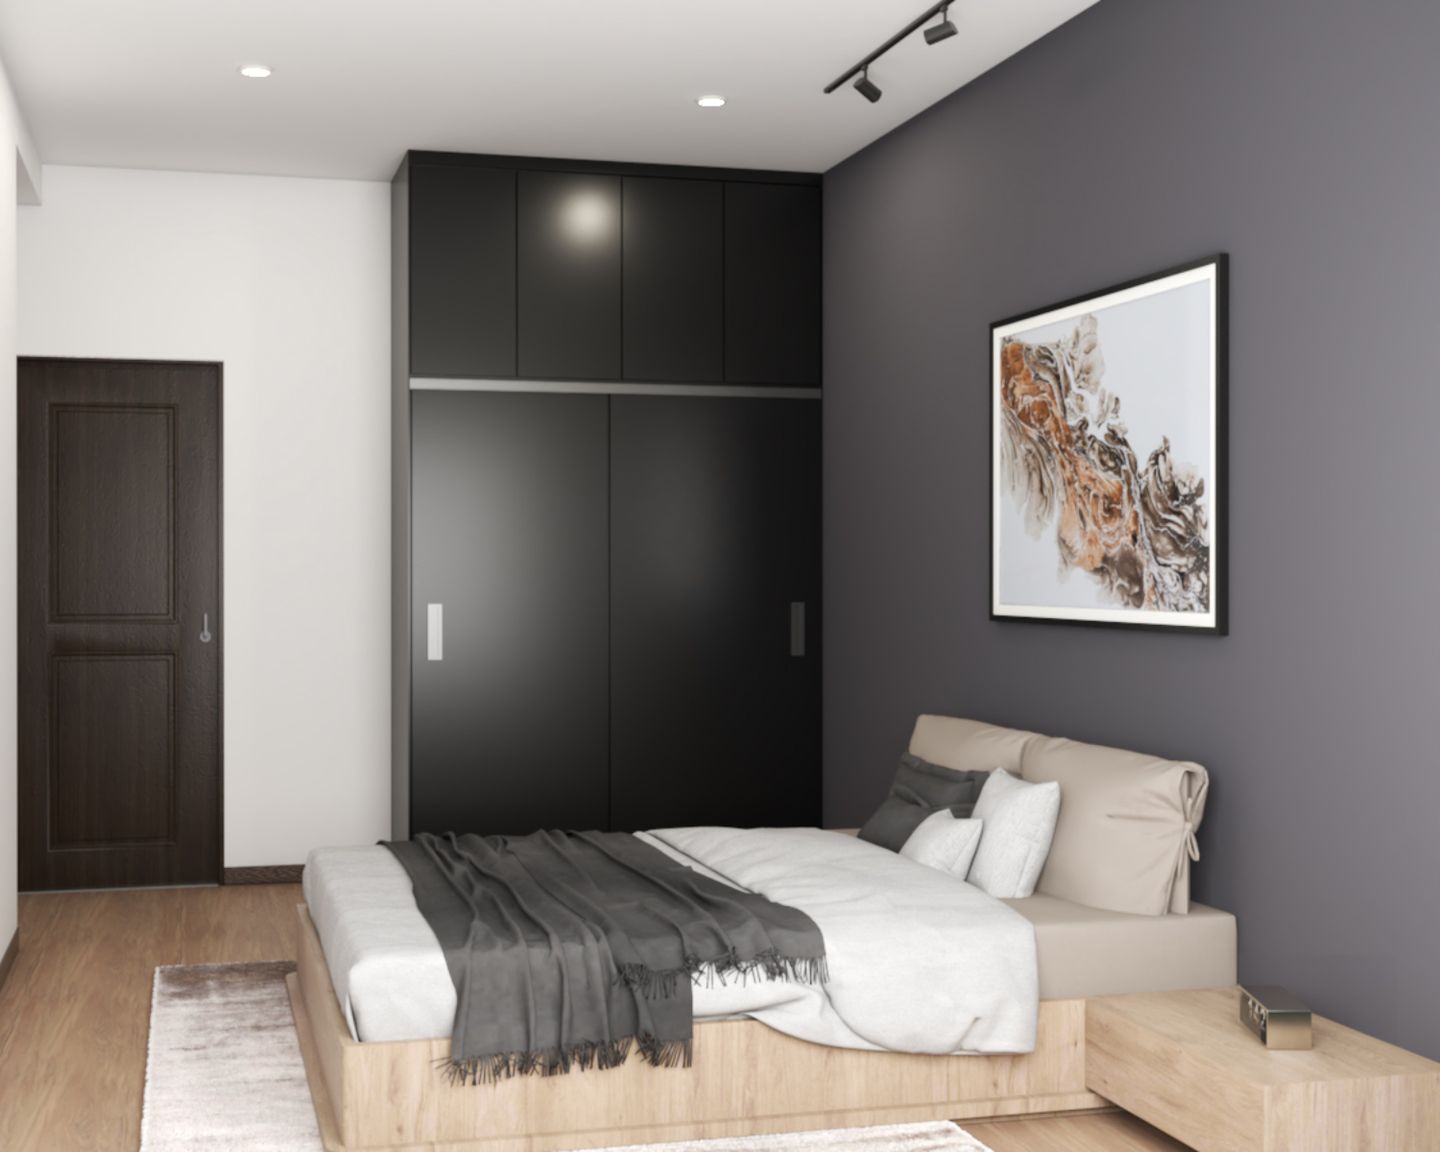 Contemporary Design With Wooden Bed And A Grey Wardrobe With A Glossy Finish - Livspace